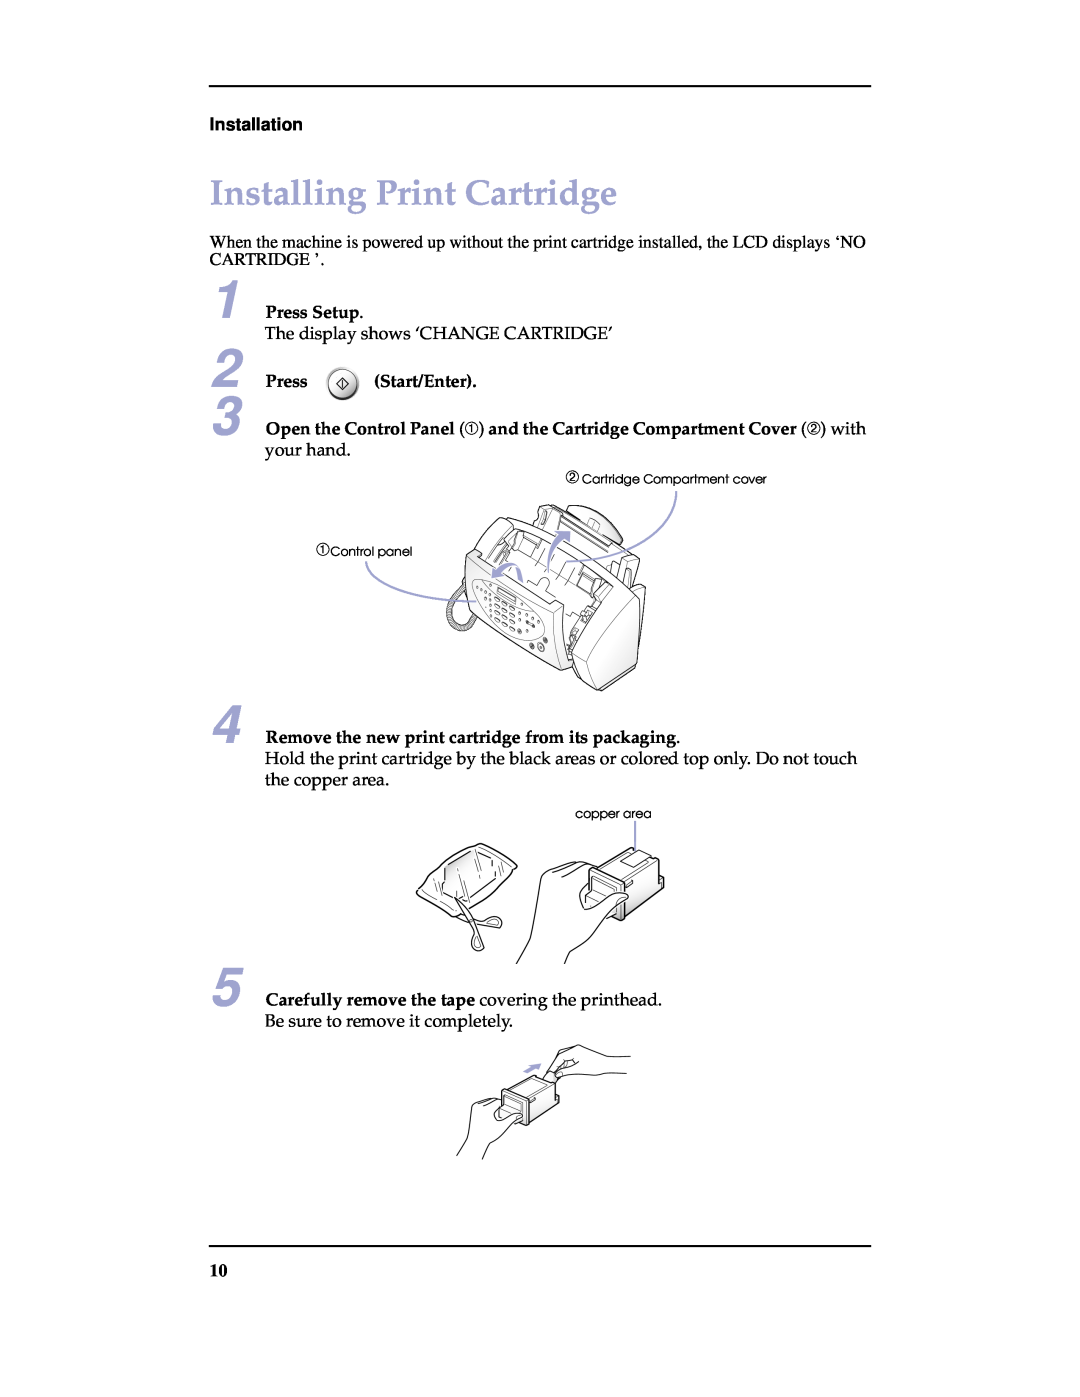 Samsung SF-3100 manual Installing Print Cartridge, Press Start/Enter, Remove the new print cartridge from its packaging 